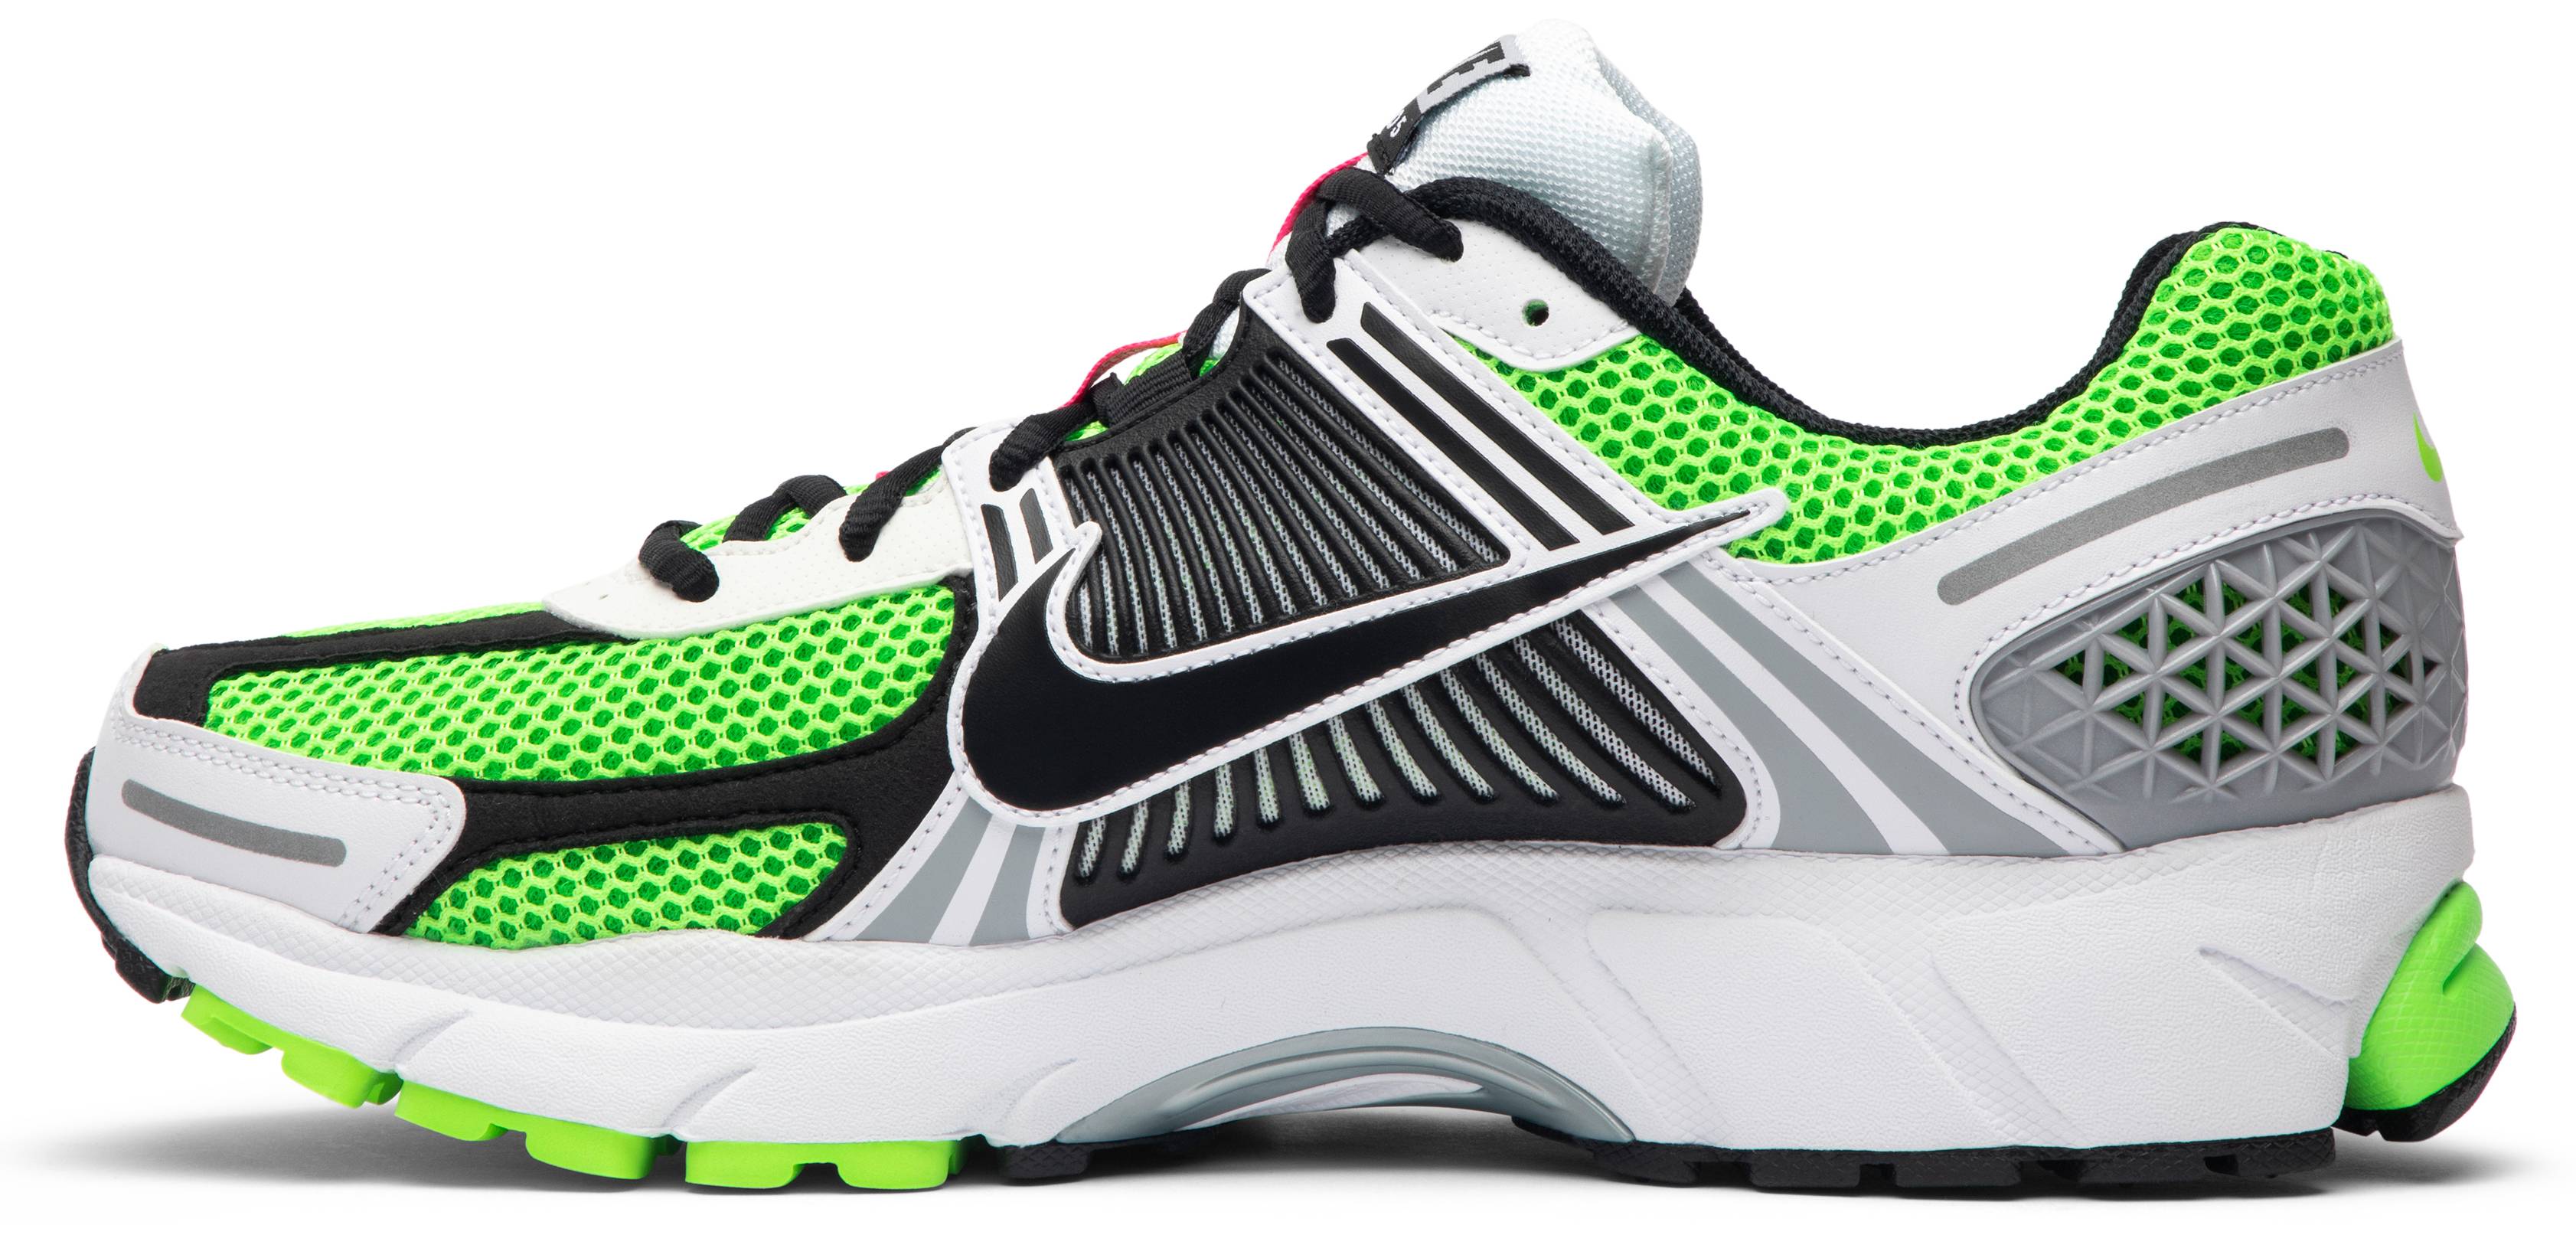 Air Zoom Vomero 5 SE SP 'Lime Green' - Nike - CI1694 300 | GOAT